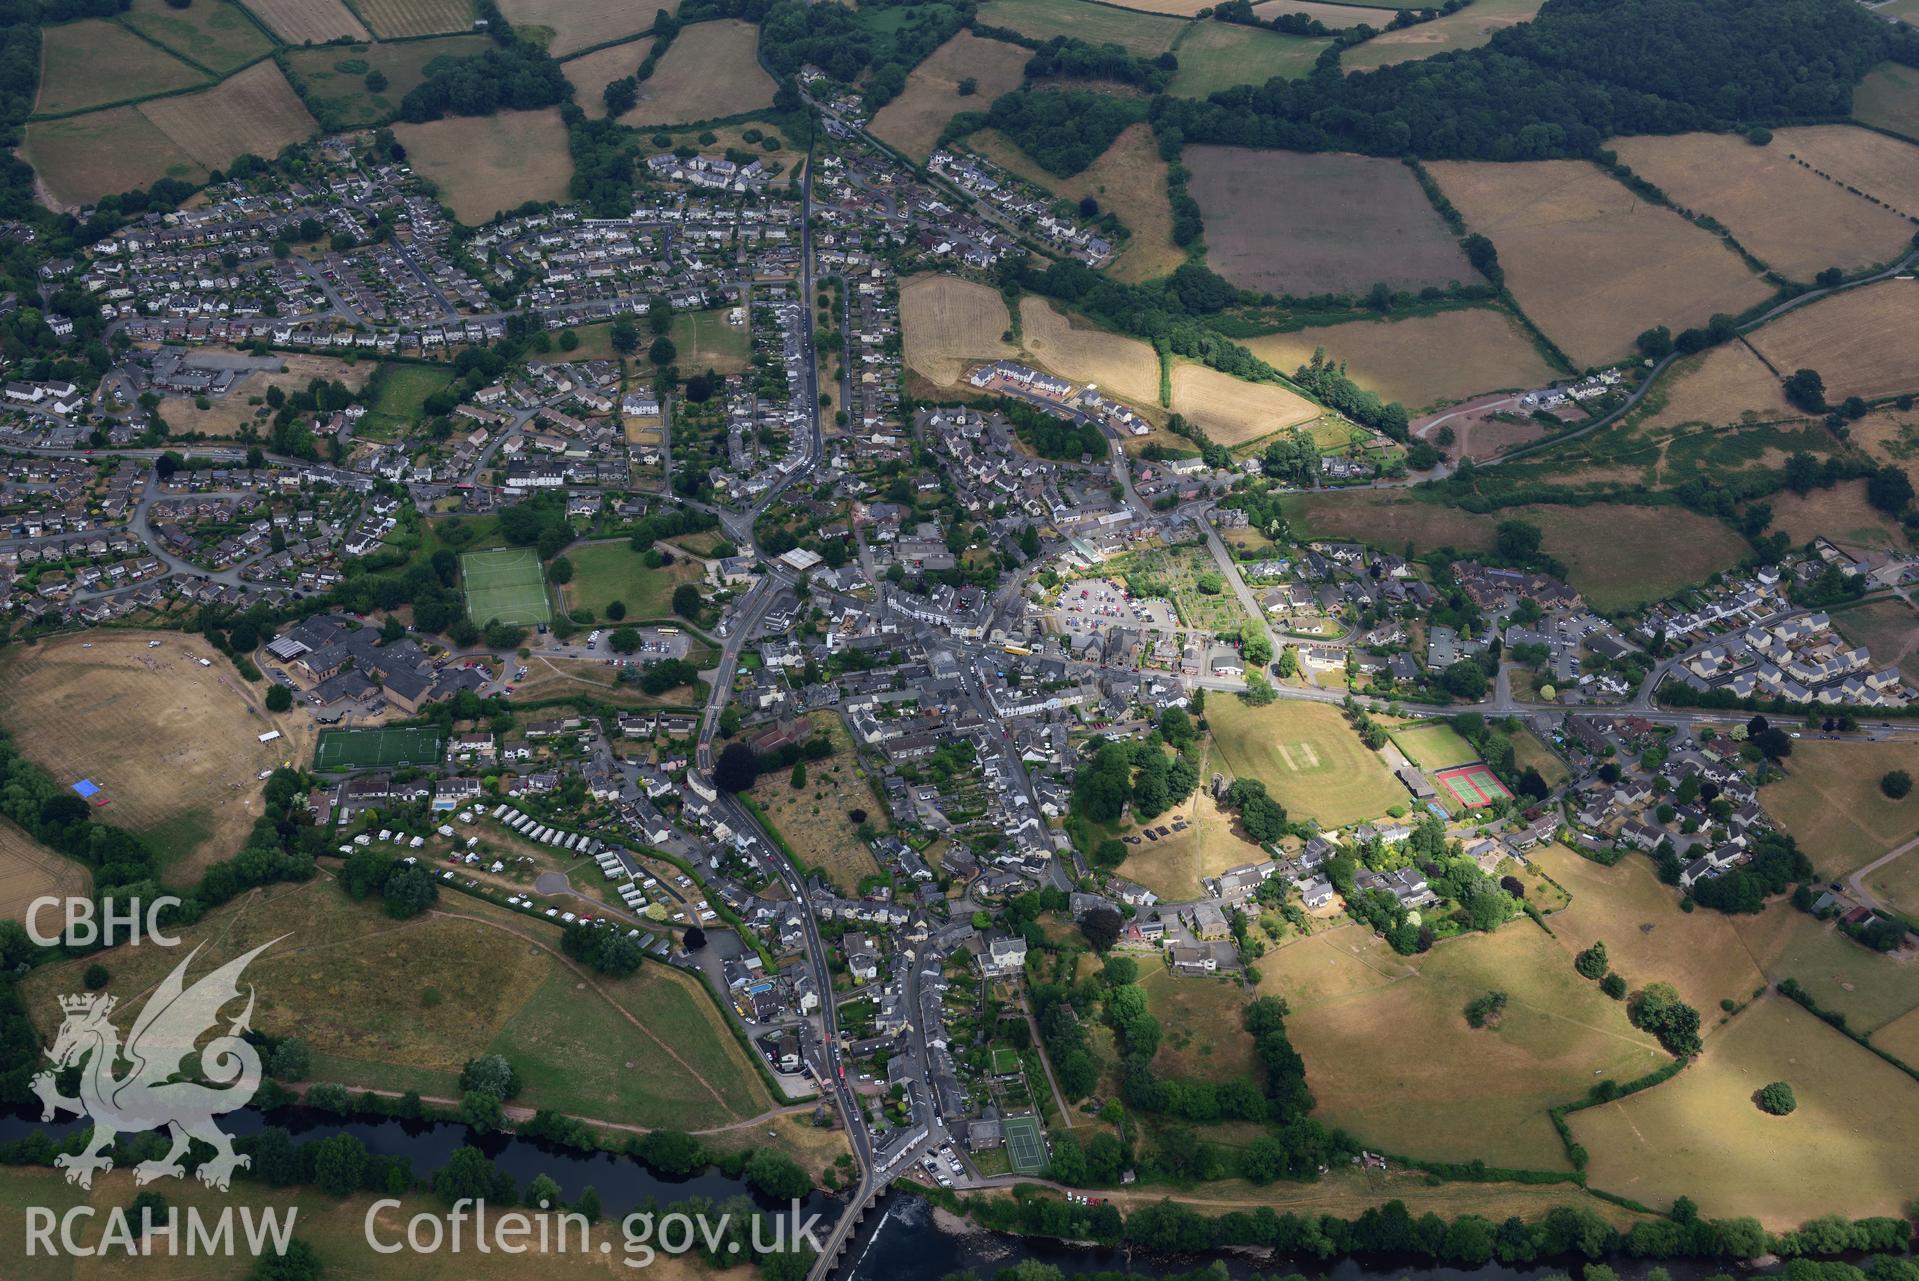 Royal Commission aerial photography of Crickhowell Town taken on 19th July 2018 during the 2018 drought.